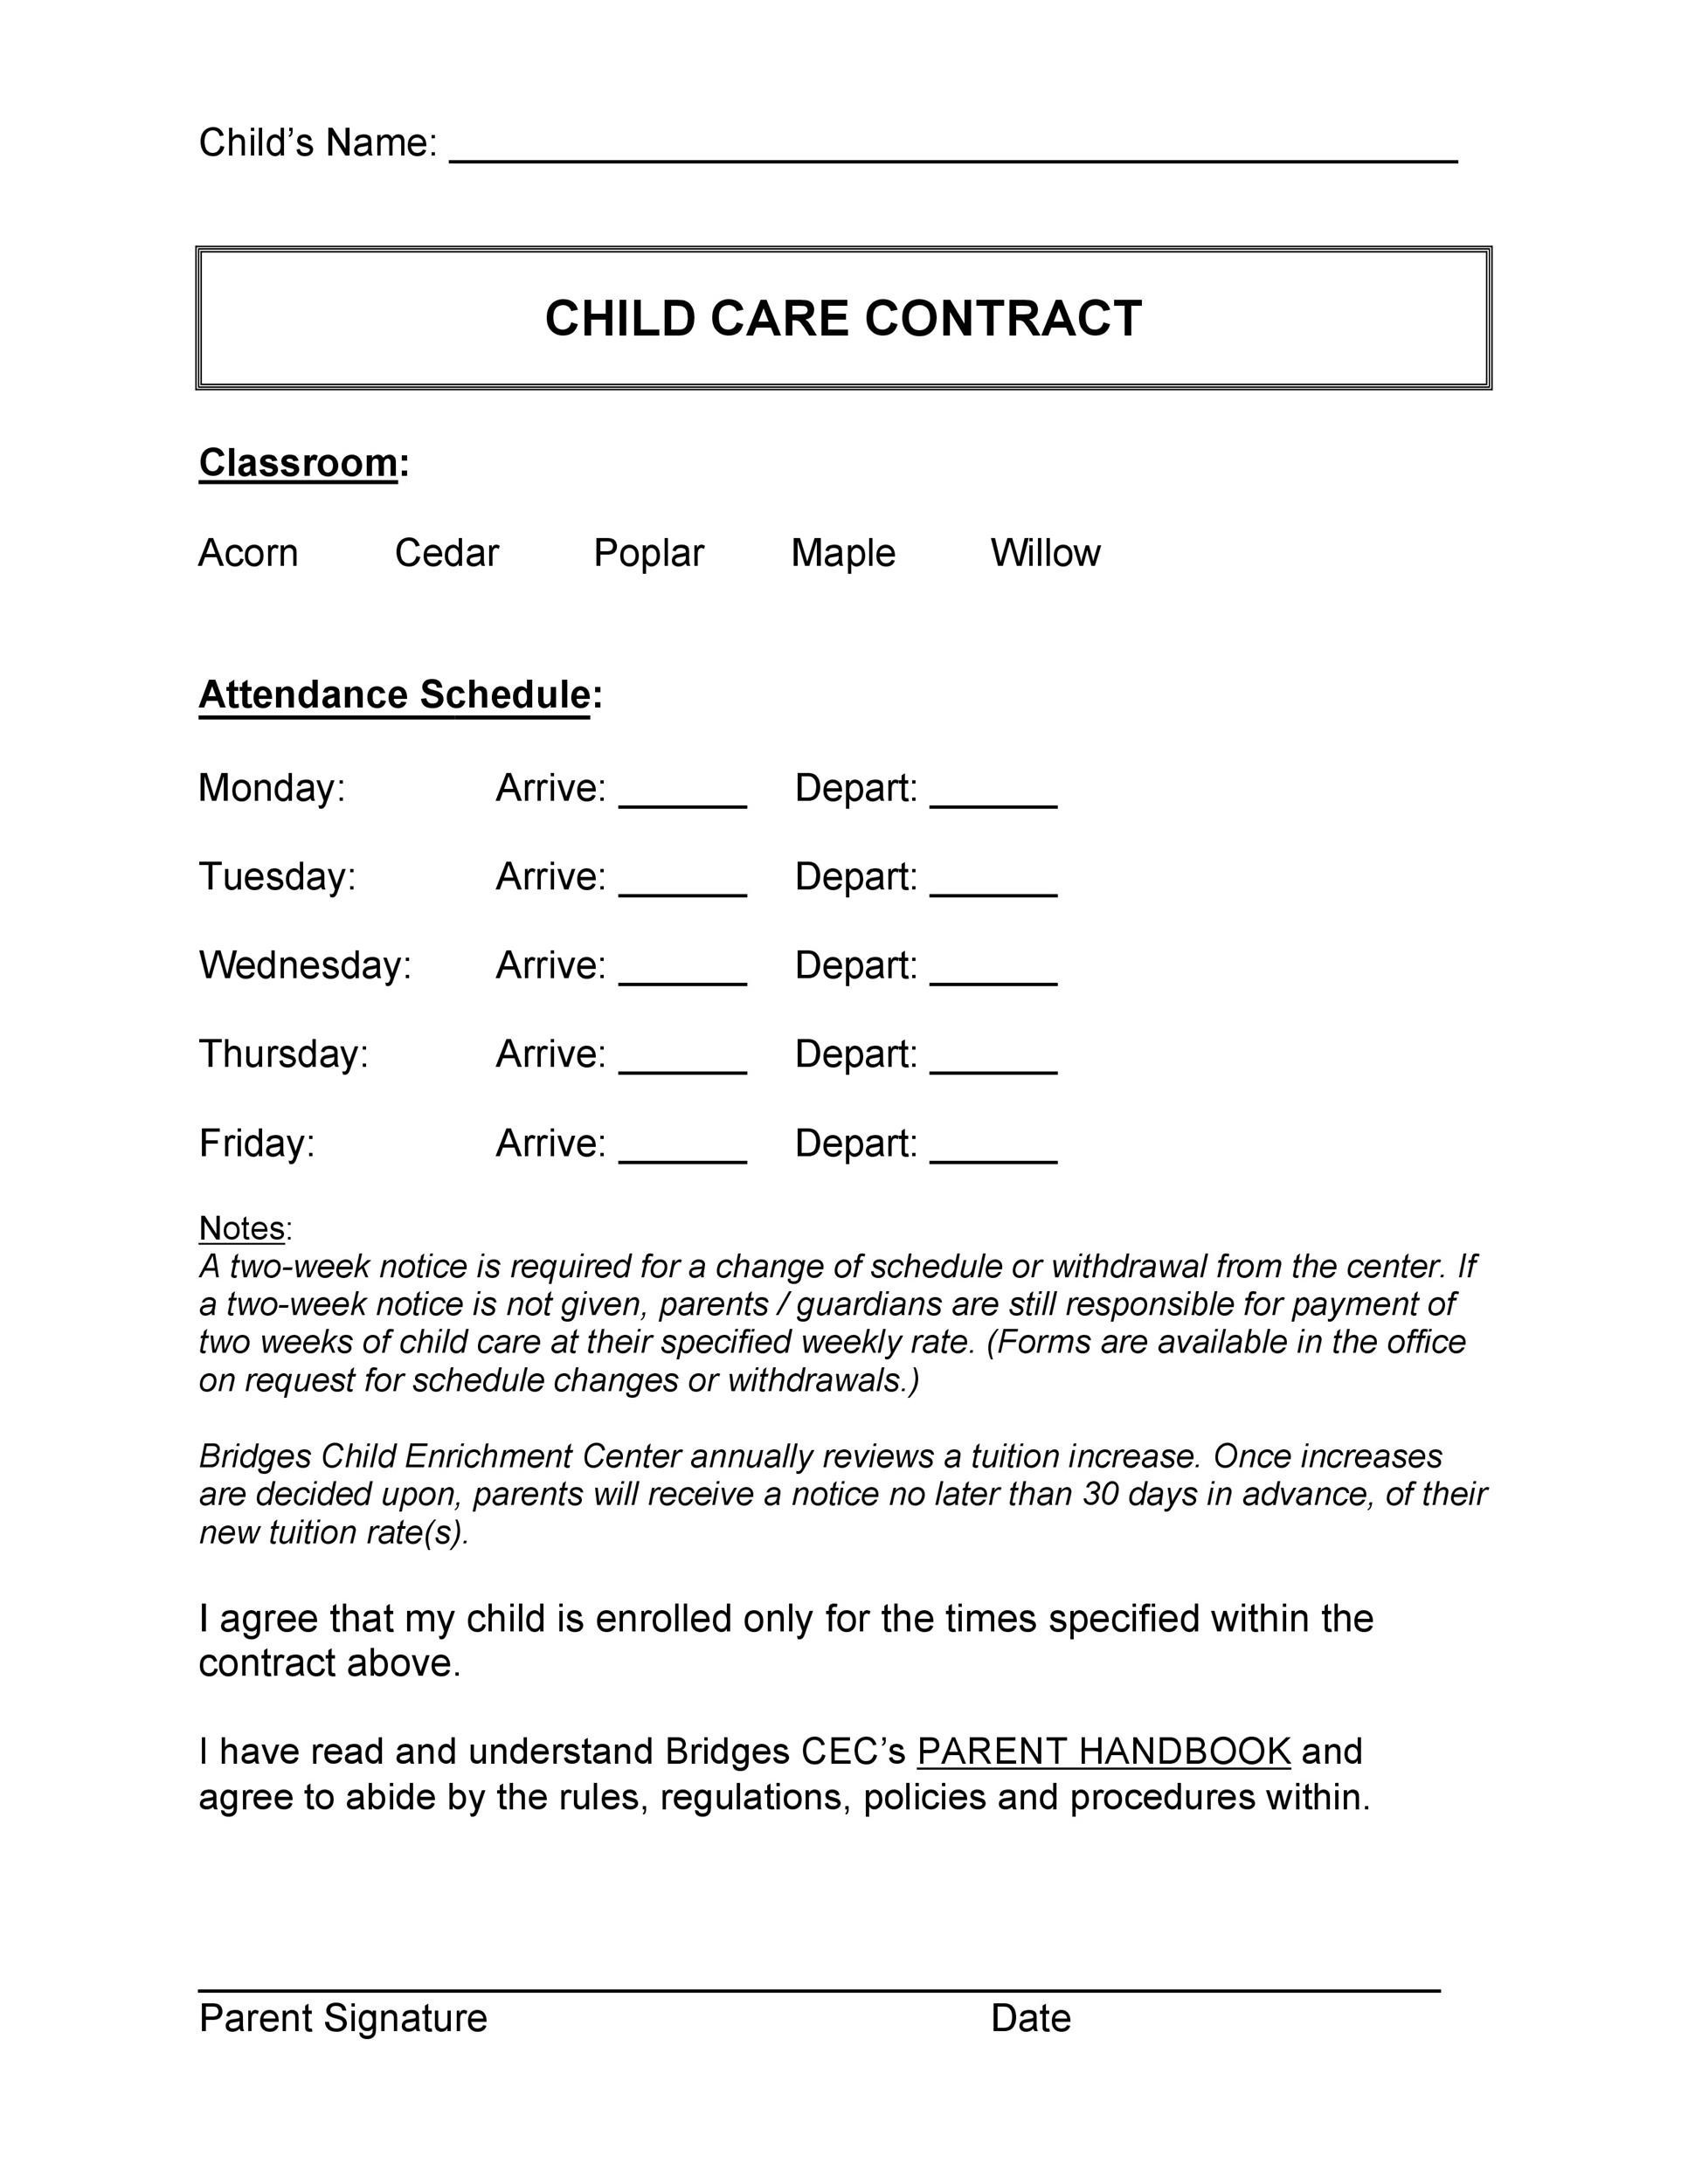 child-care-contract-template-free-aulaiestpdm-blog